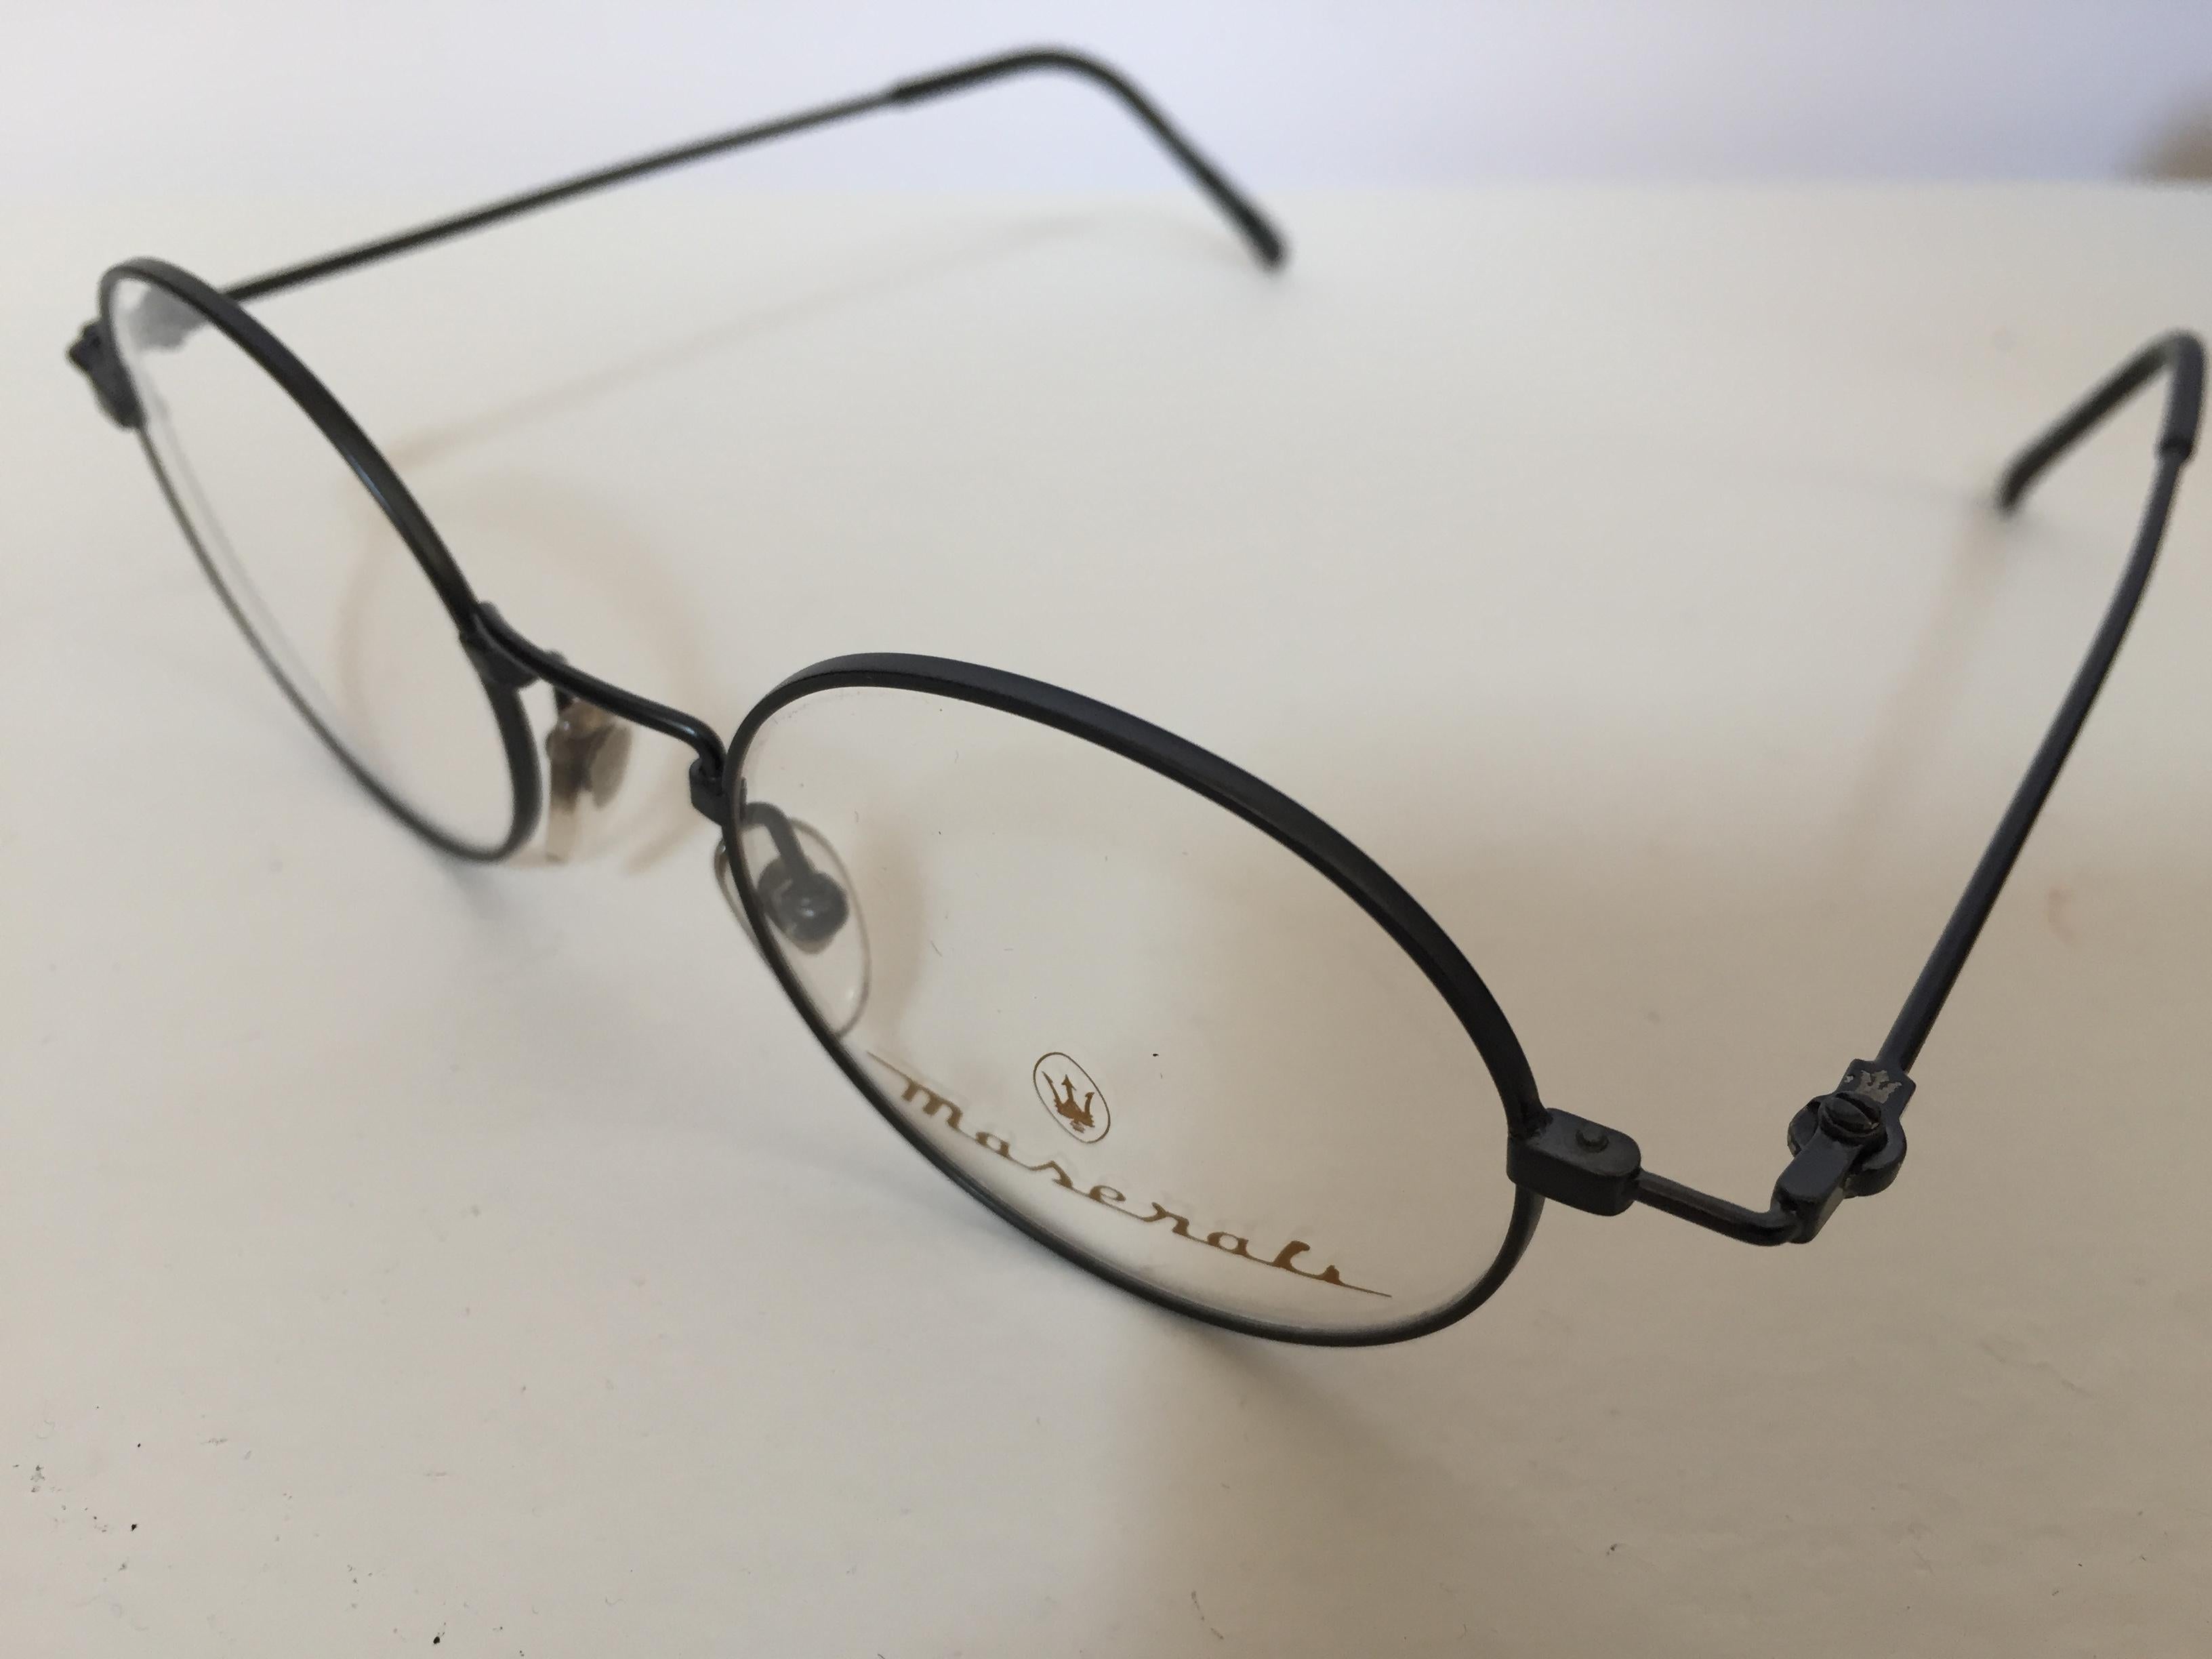 Vintage Maserati eyeglasses titanium black.
Vintage glasses maserati angular shape circa 1980s
Glasses are delivered without a case.
Have an optician adjust your glasses correctly so that they fit well.
New old stock eyeglasses, man, Maserati